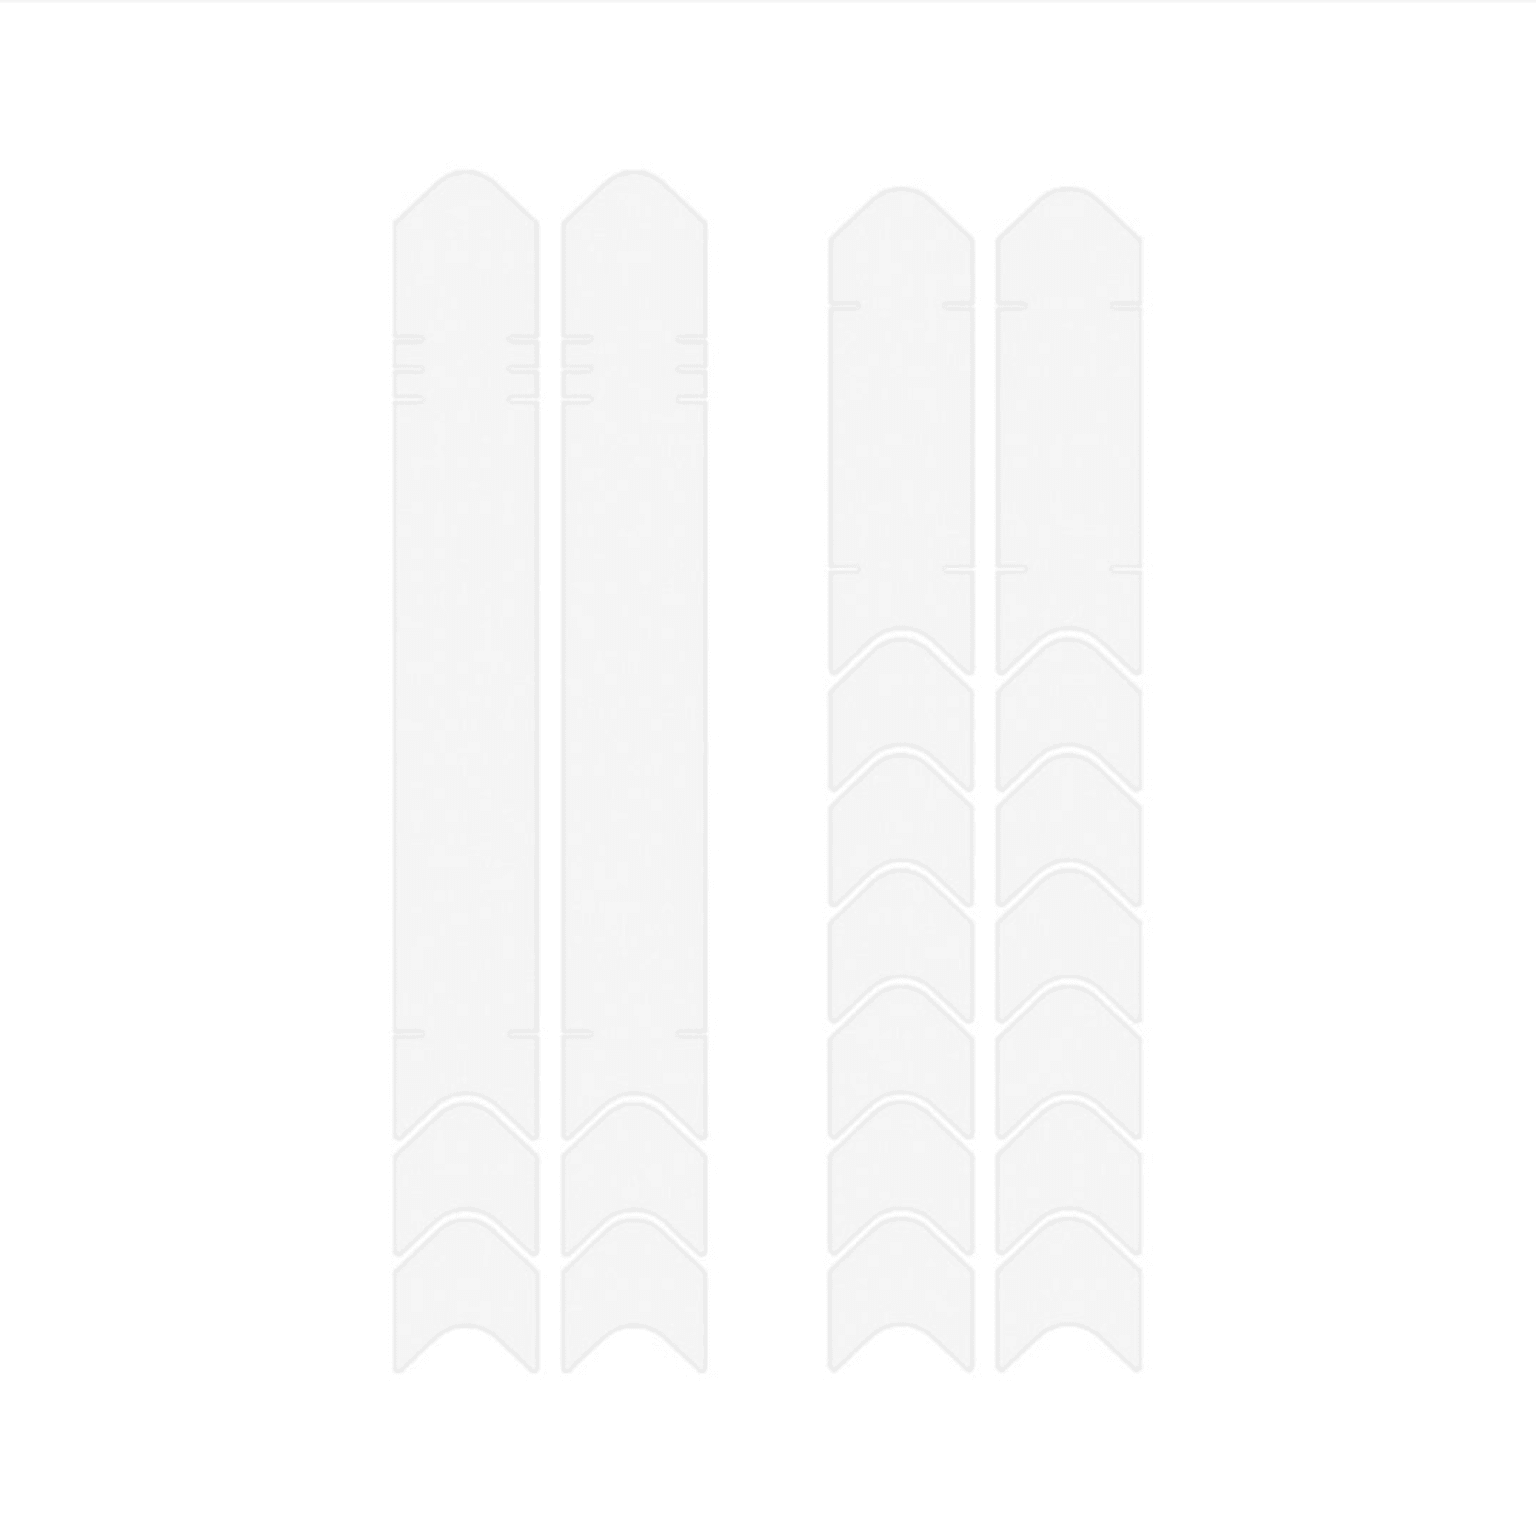 MucOff MucOff Chainstay Protection Kit Film de protection 1